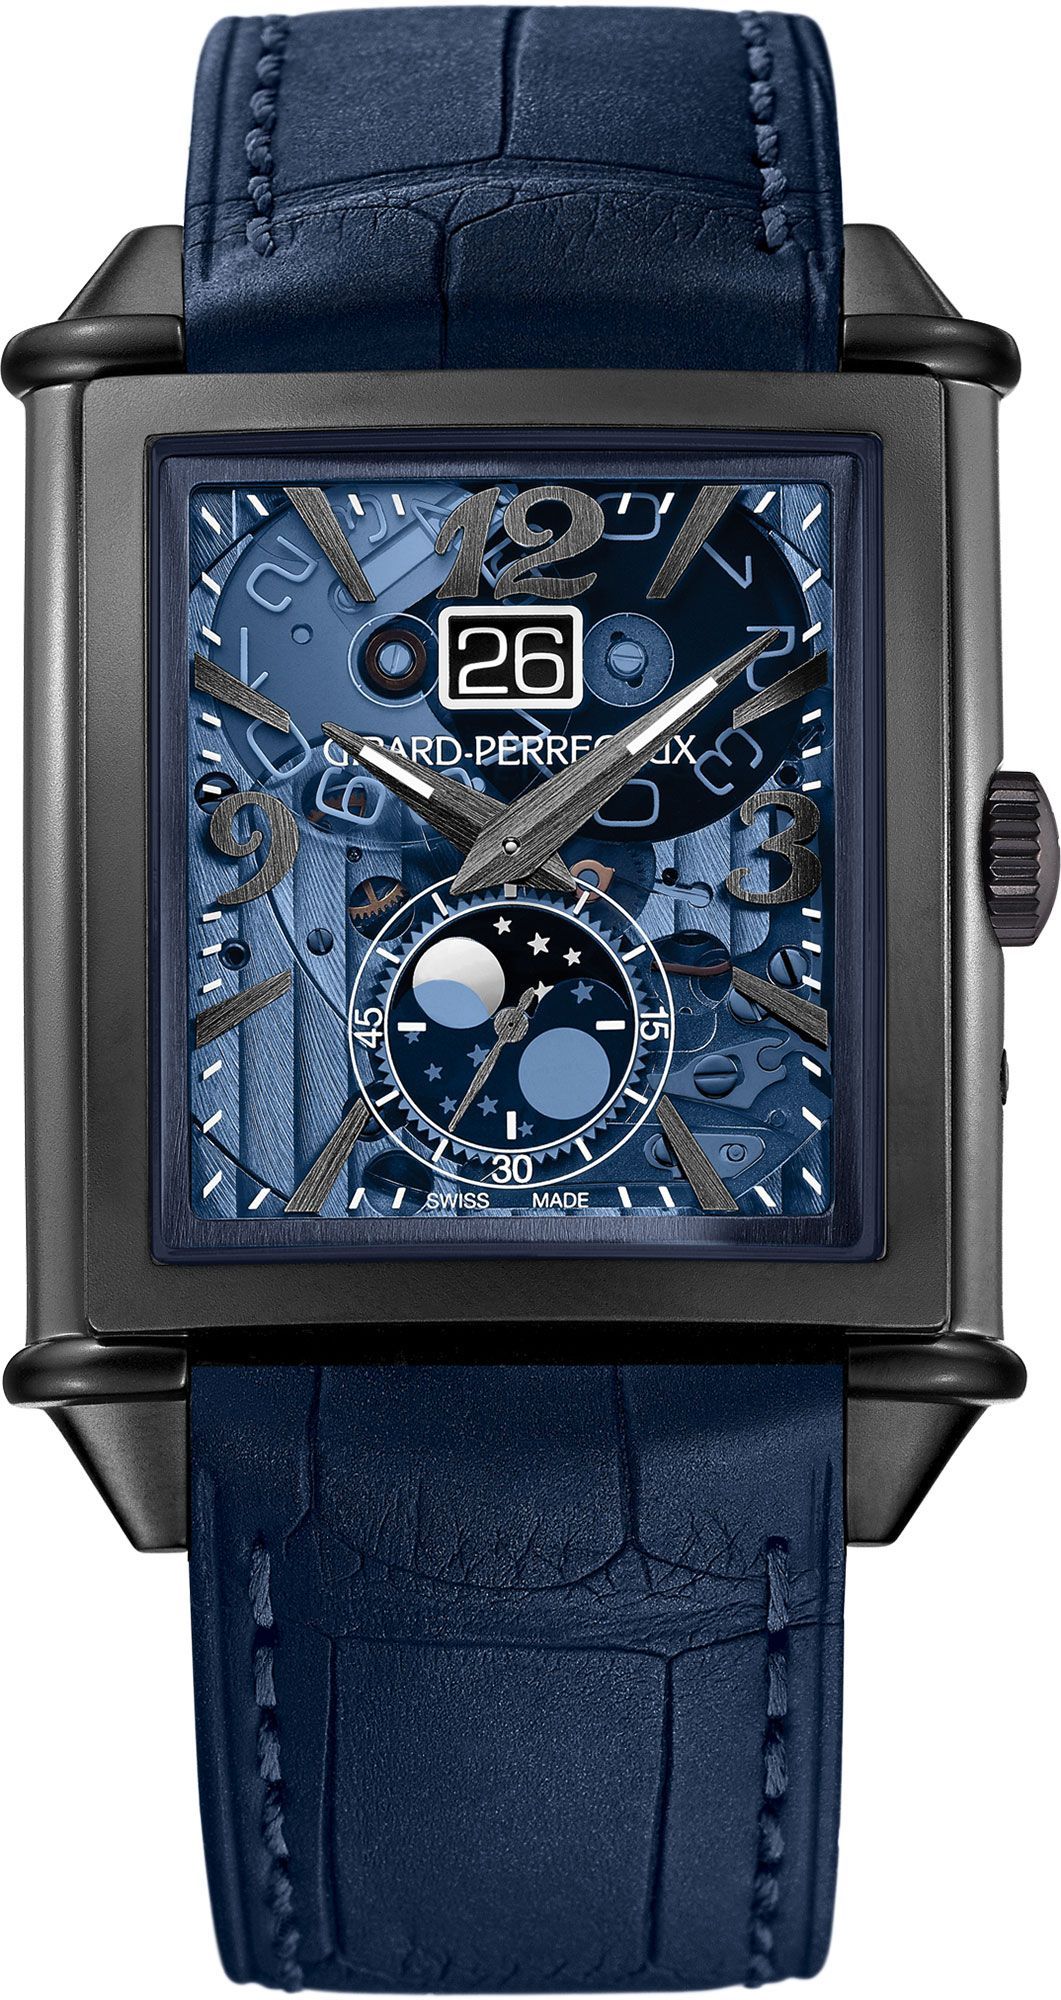 Girard-Perregaux Date And Moon Phases 35.25 mm Watch in Blue Dial For Men - 1